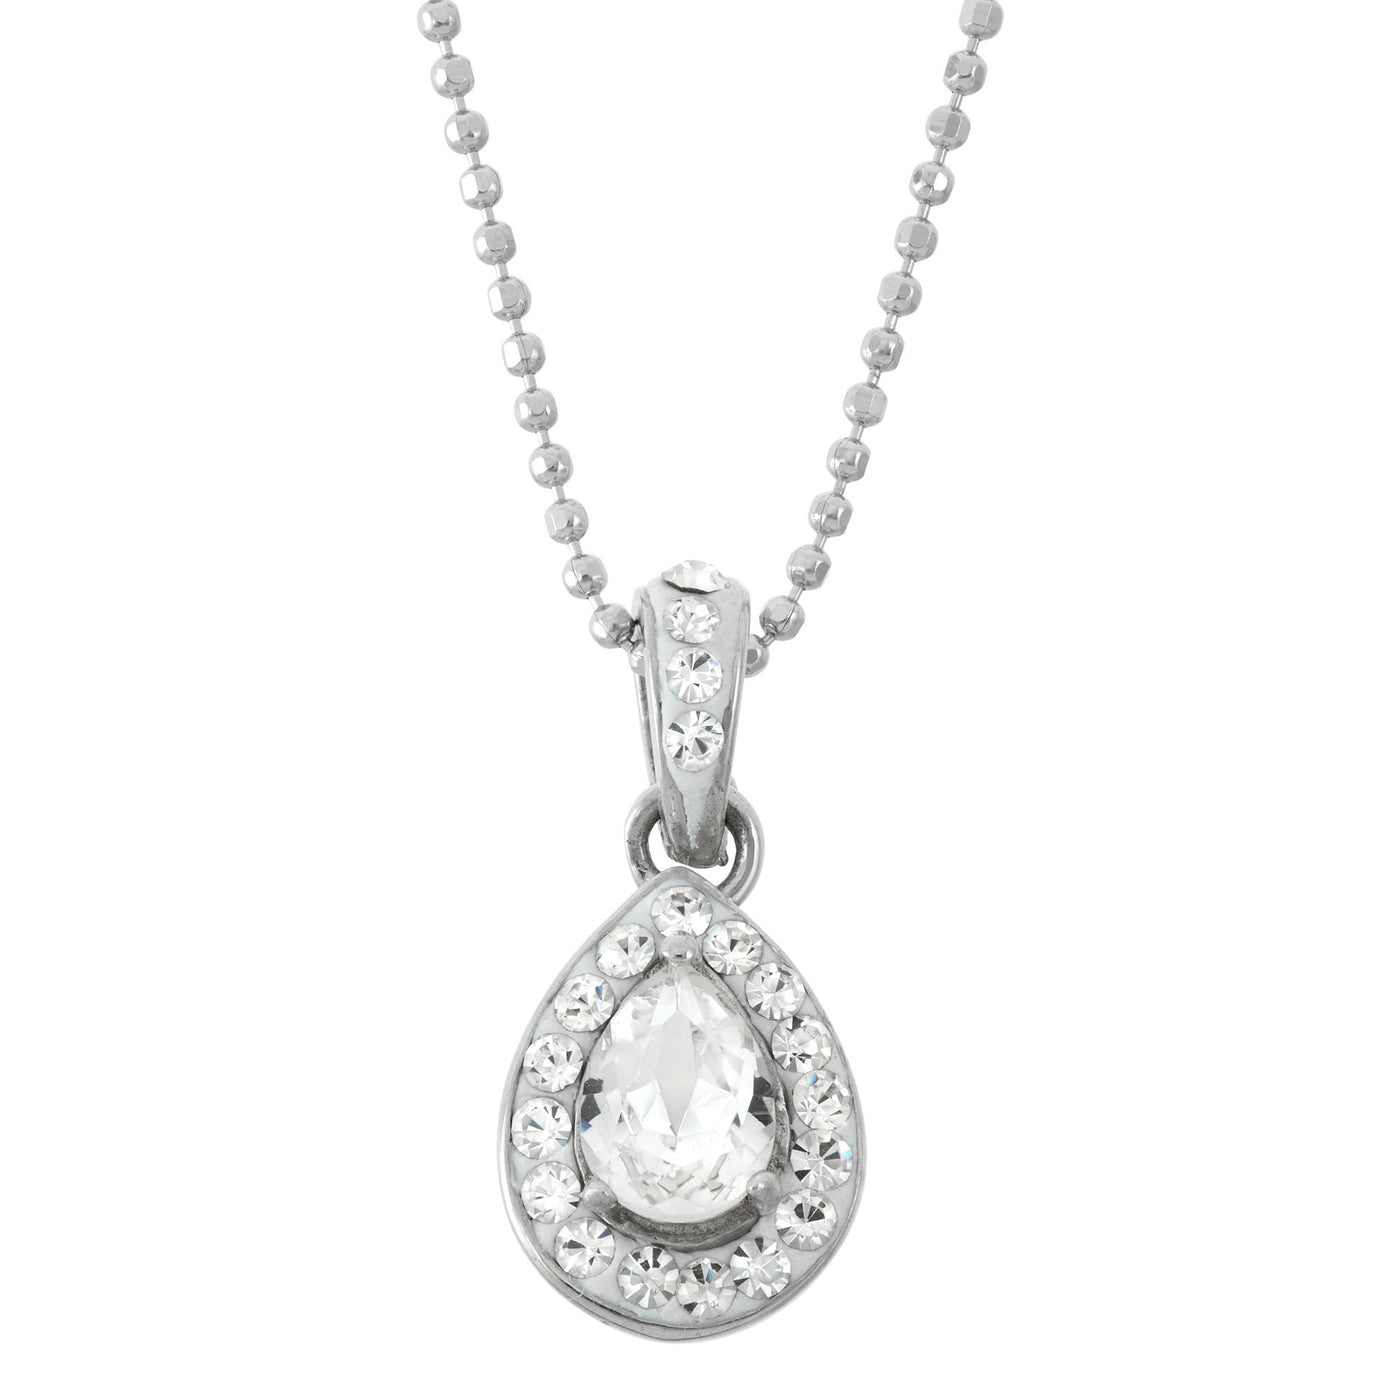 Rebecca Sloane Silver Teardrop Necklace With Crystal Elements